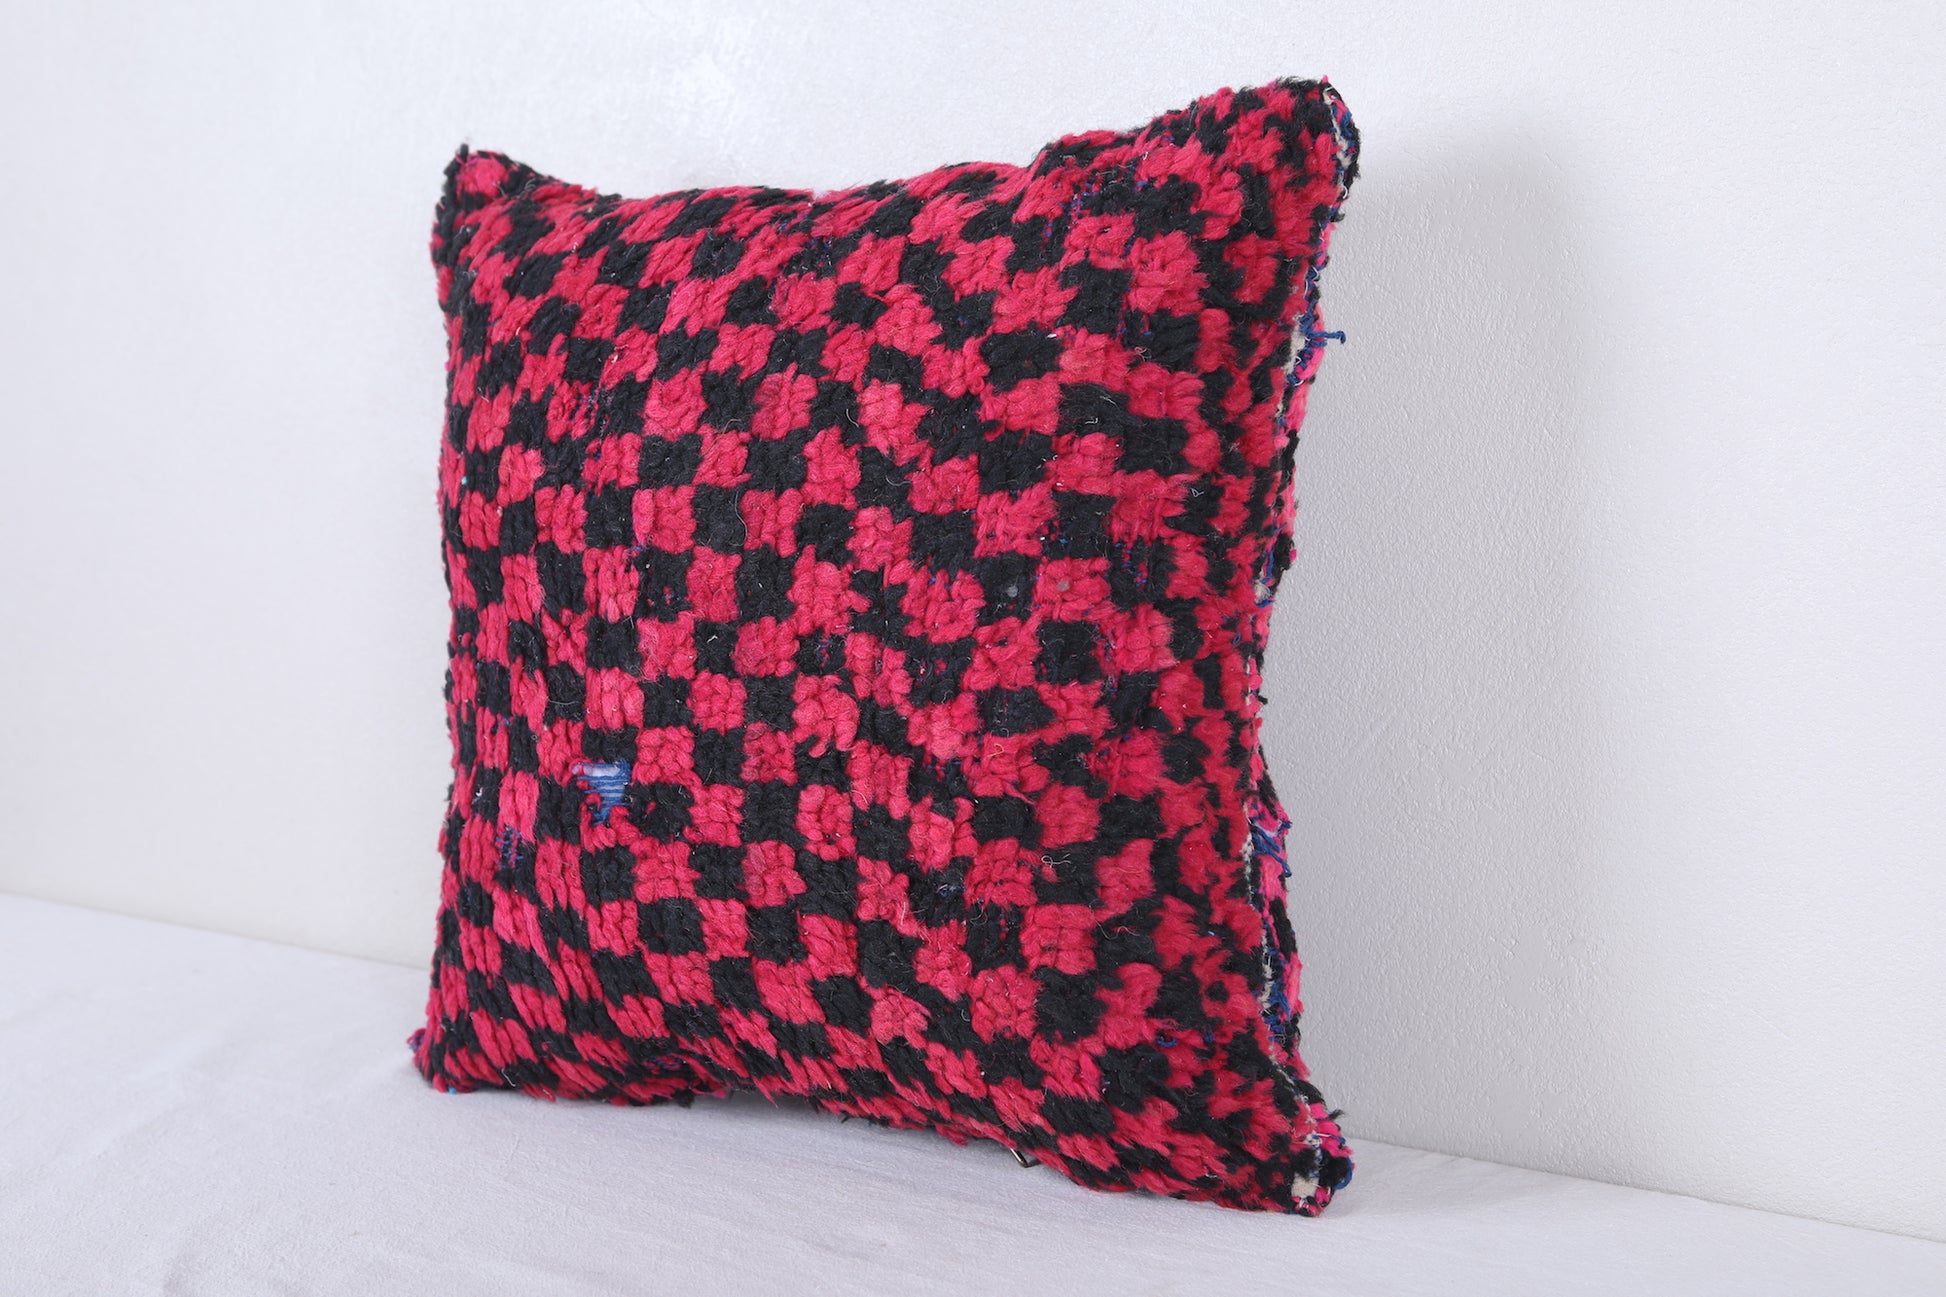 Vintage moroccan handwoven kilim pillow 18.5 INCHES X 18.8 INCHES